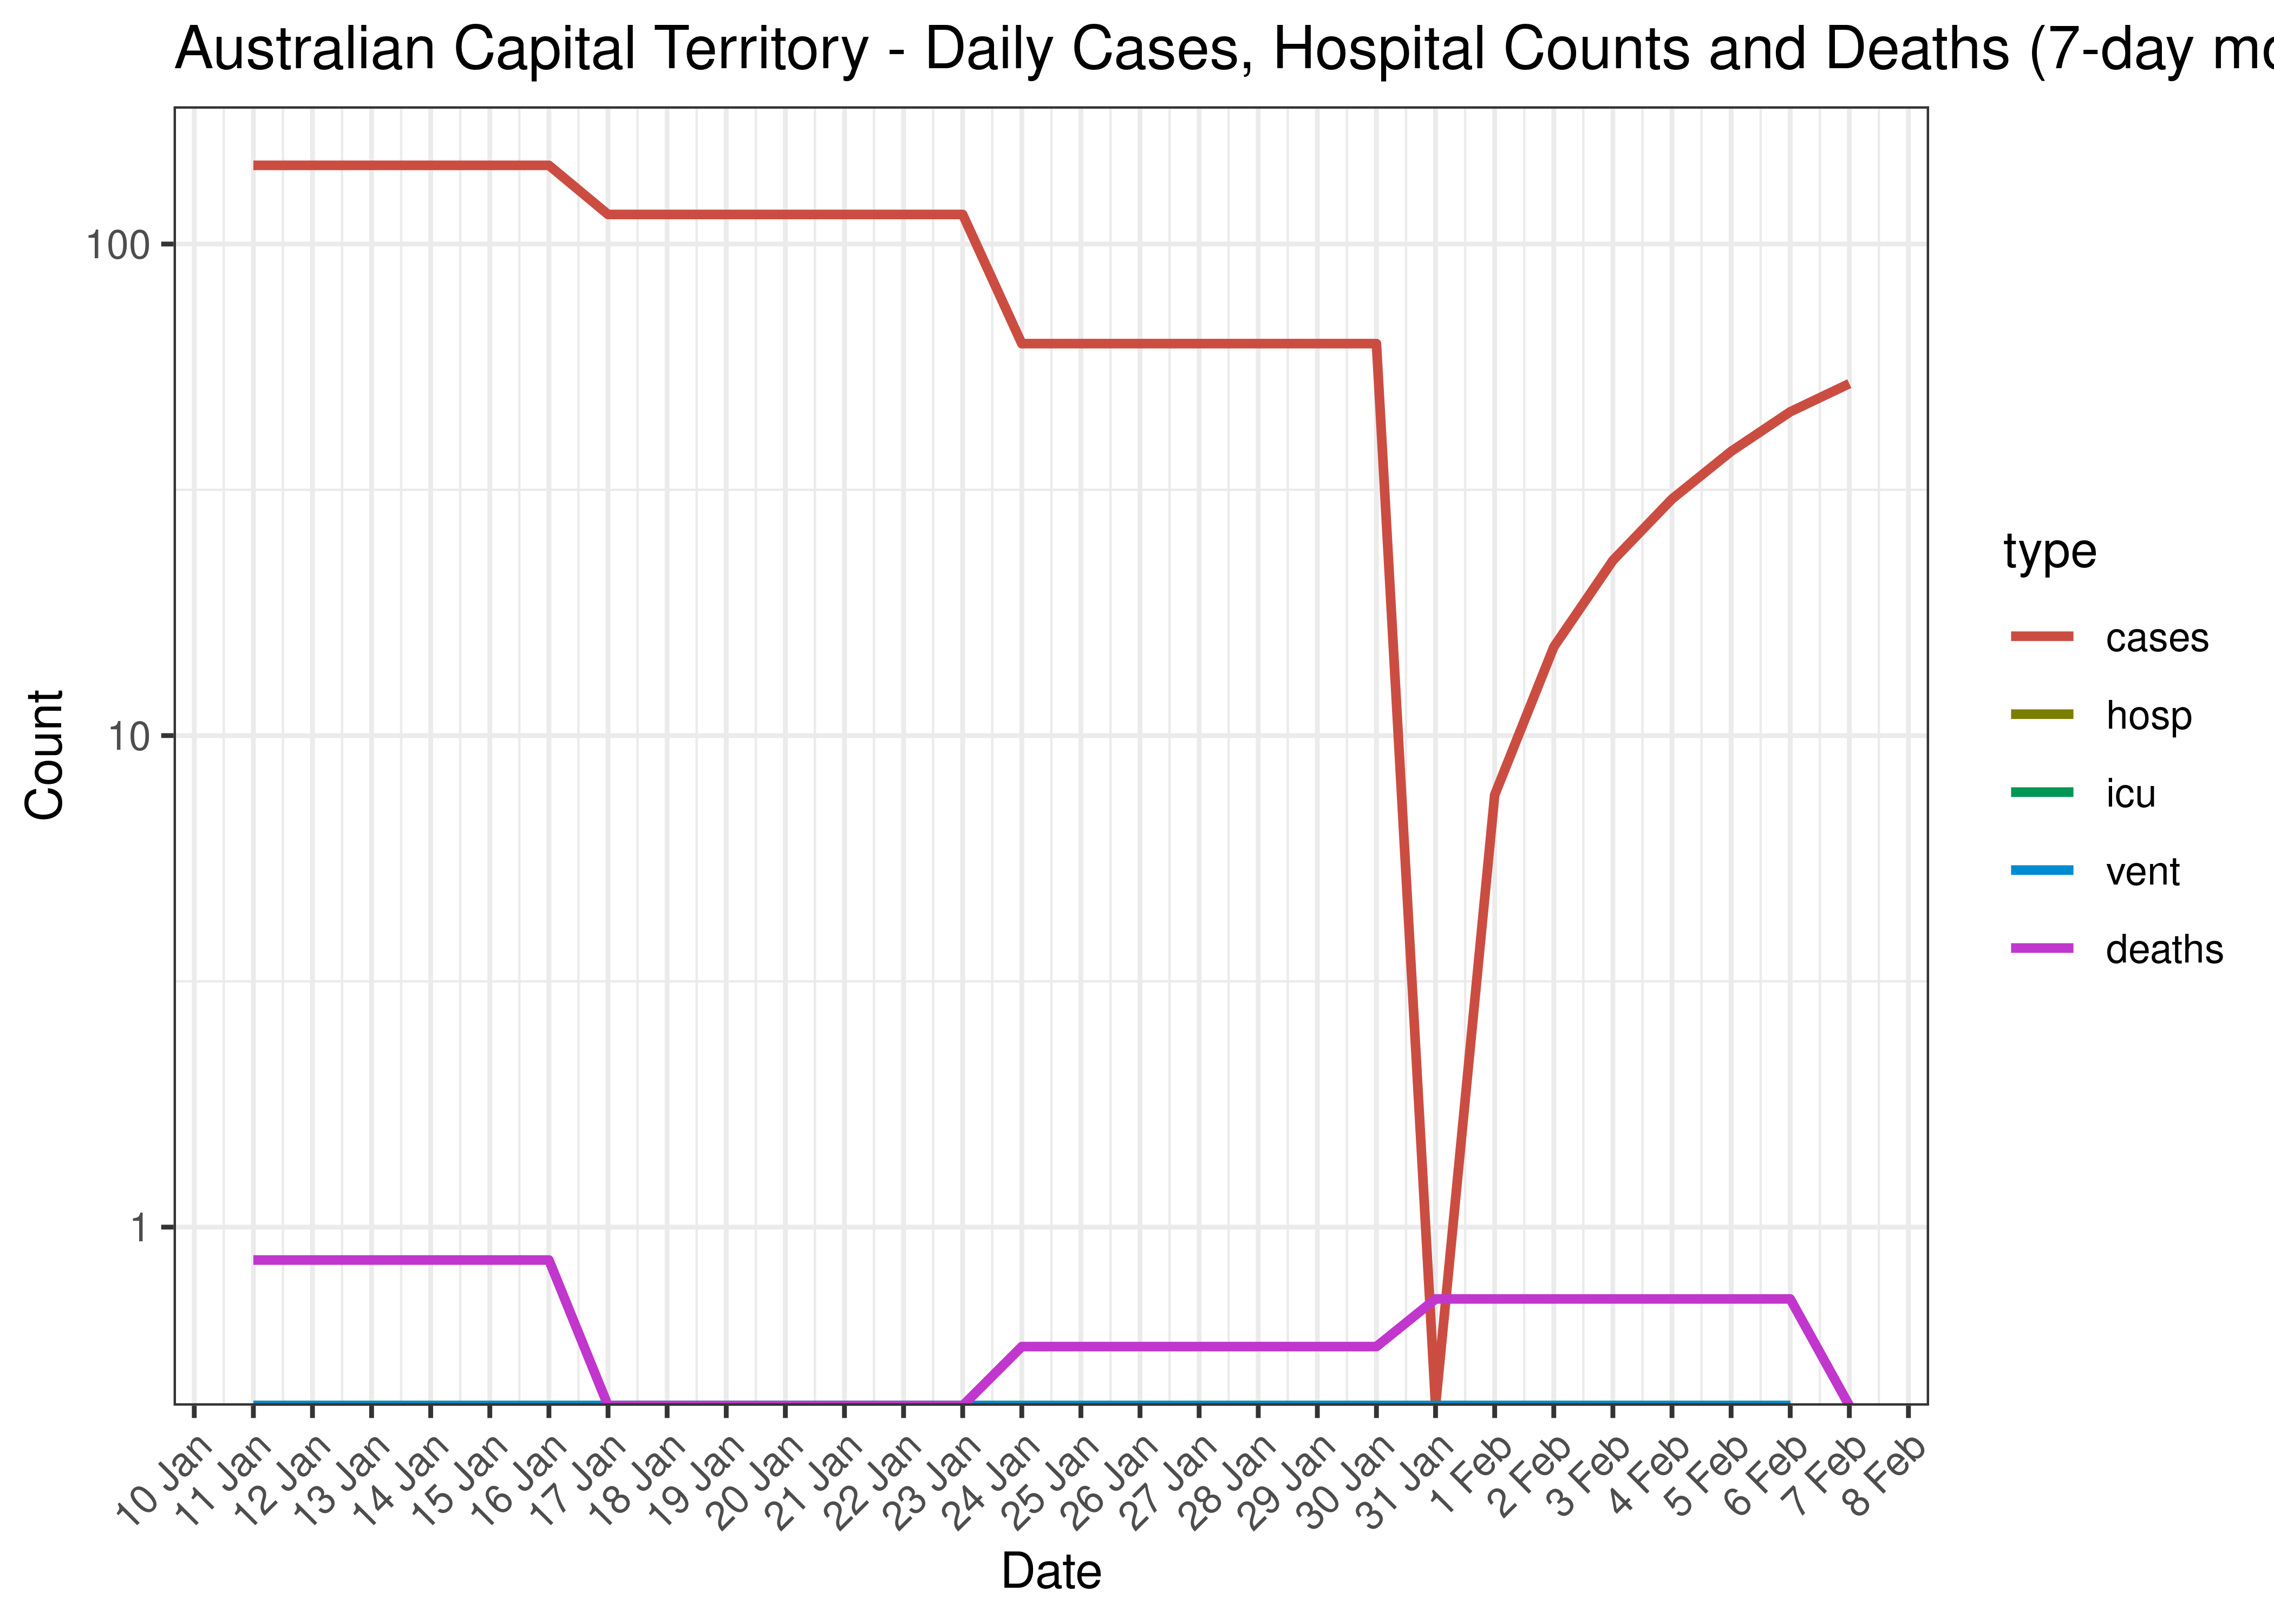 Australian Capital Territory - Daily Cases, Admissions and Deaths for Last 30-days (7-day moving average)